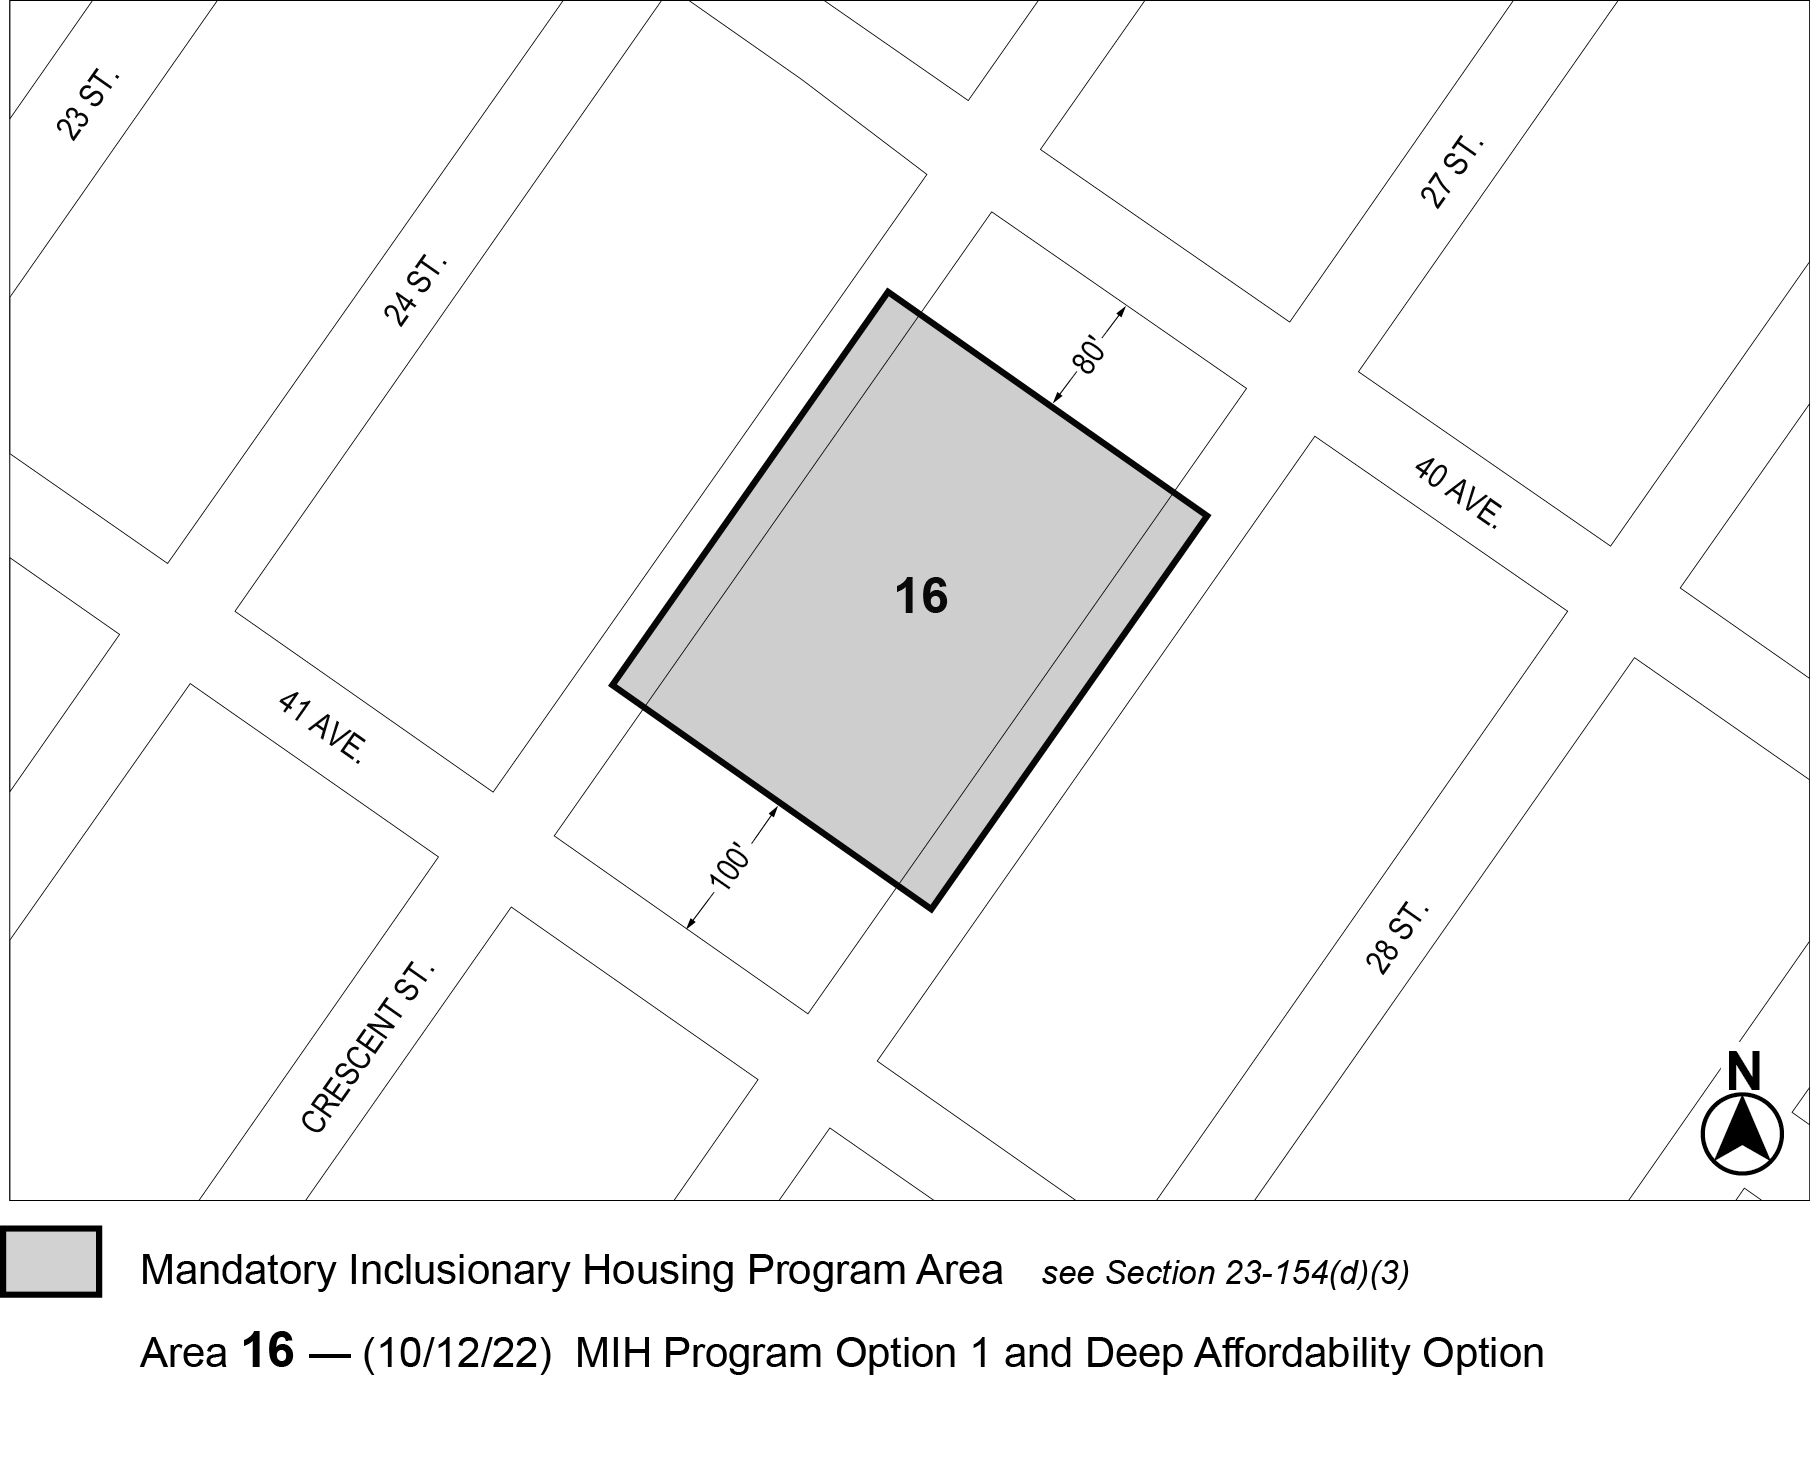 APPENDIX F QN CD 10, Map 10, MIHa 16, per <a class='sec-link-inline' target='_blank' href='/article-iv/chapter-0#40-25'><span>40-25</span></a> Crescent Street (N 220170 ZRQ), adopted 12th October, 2022